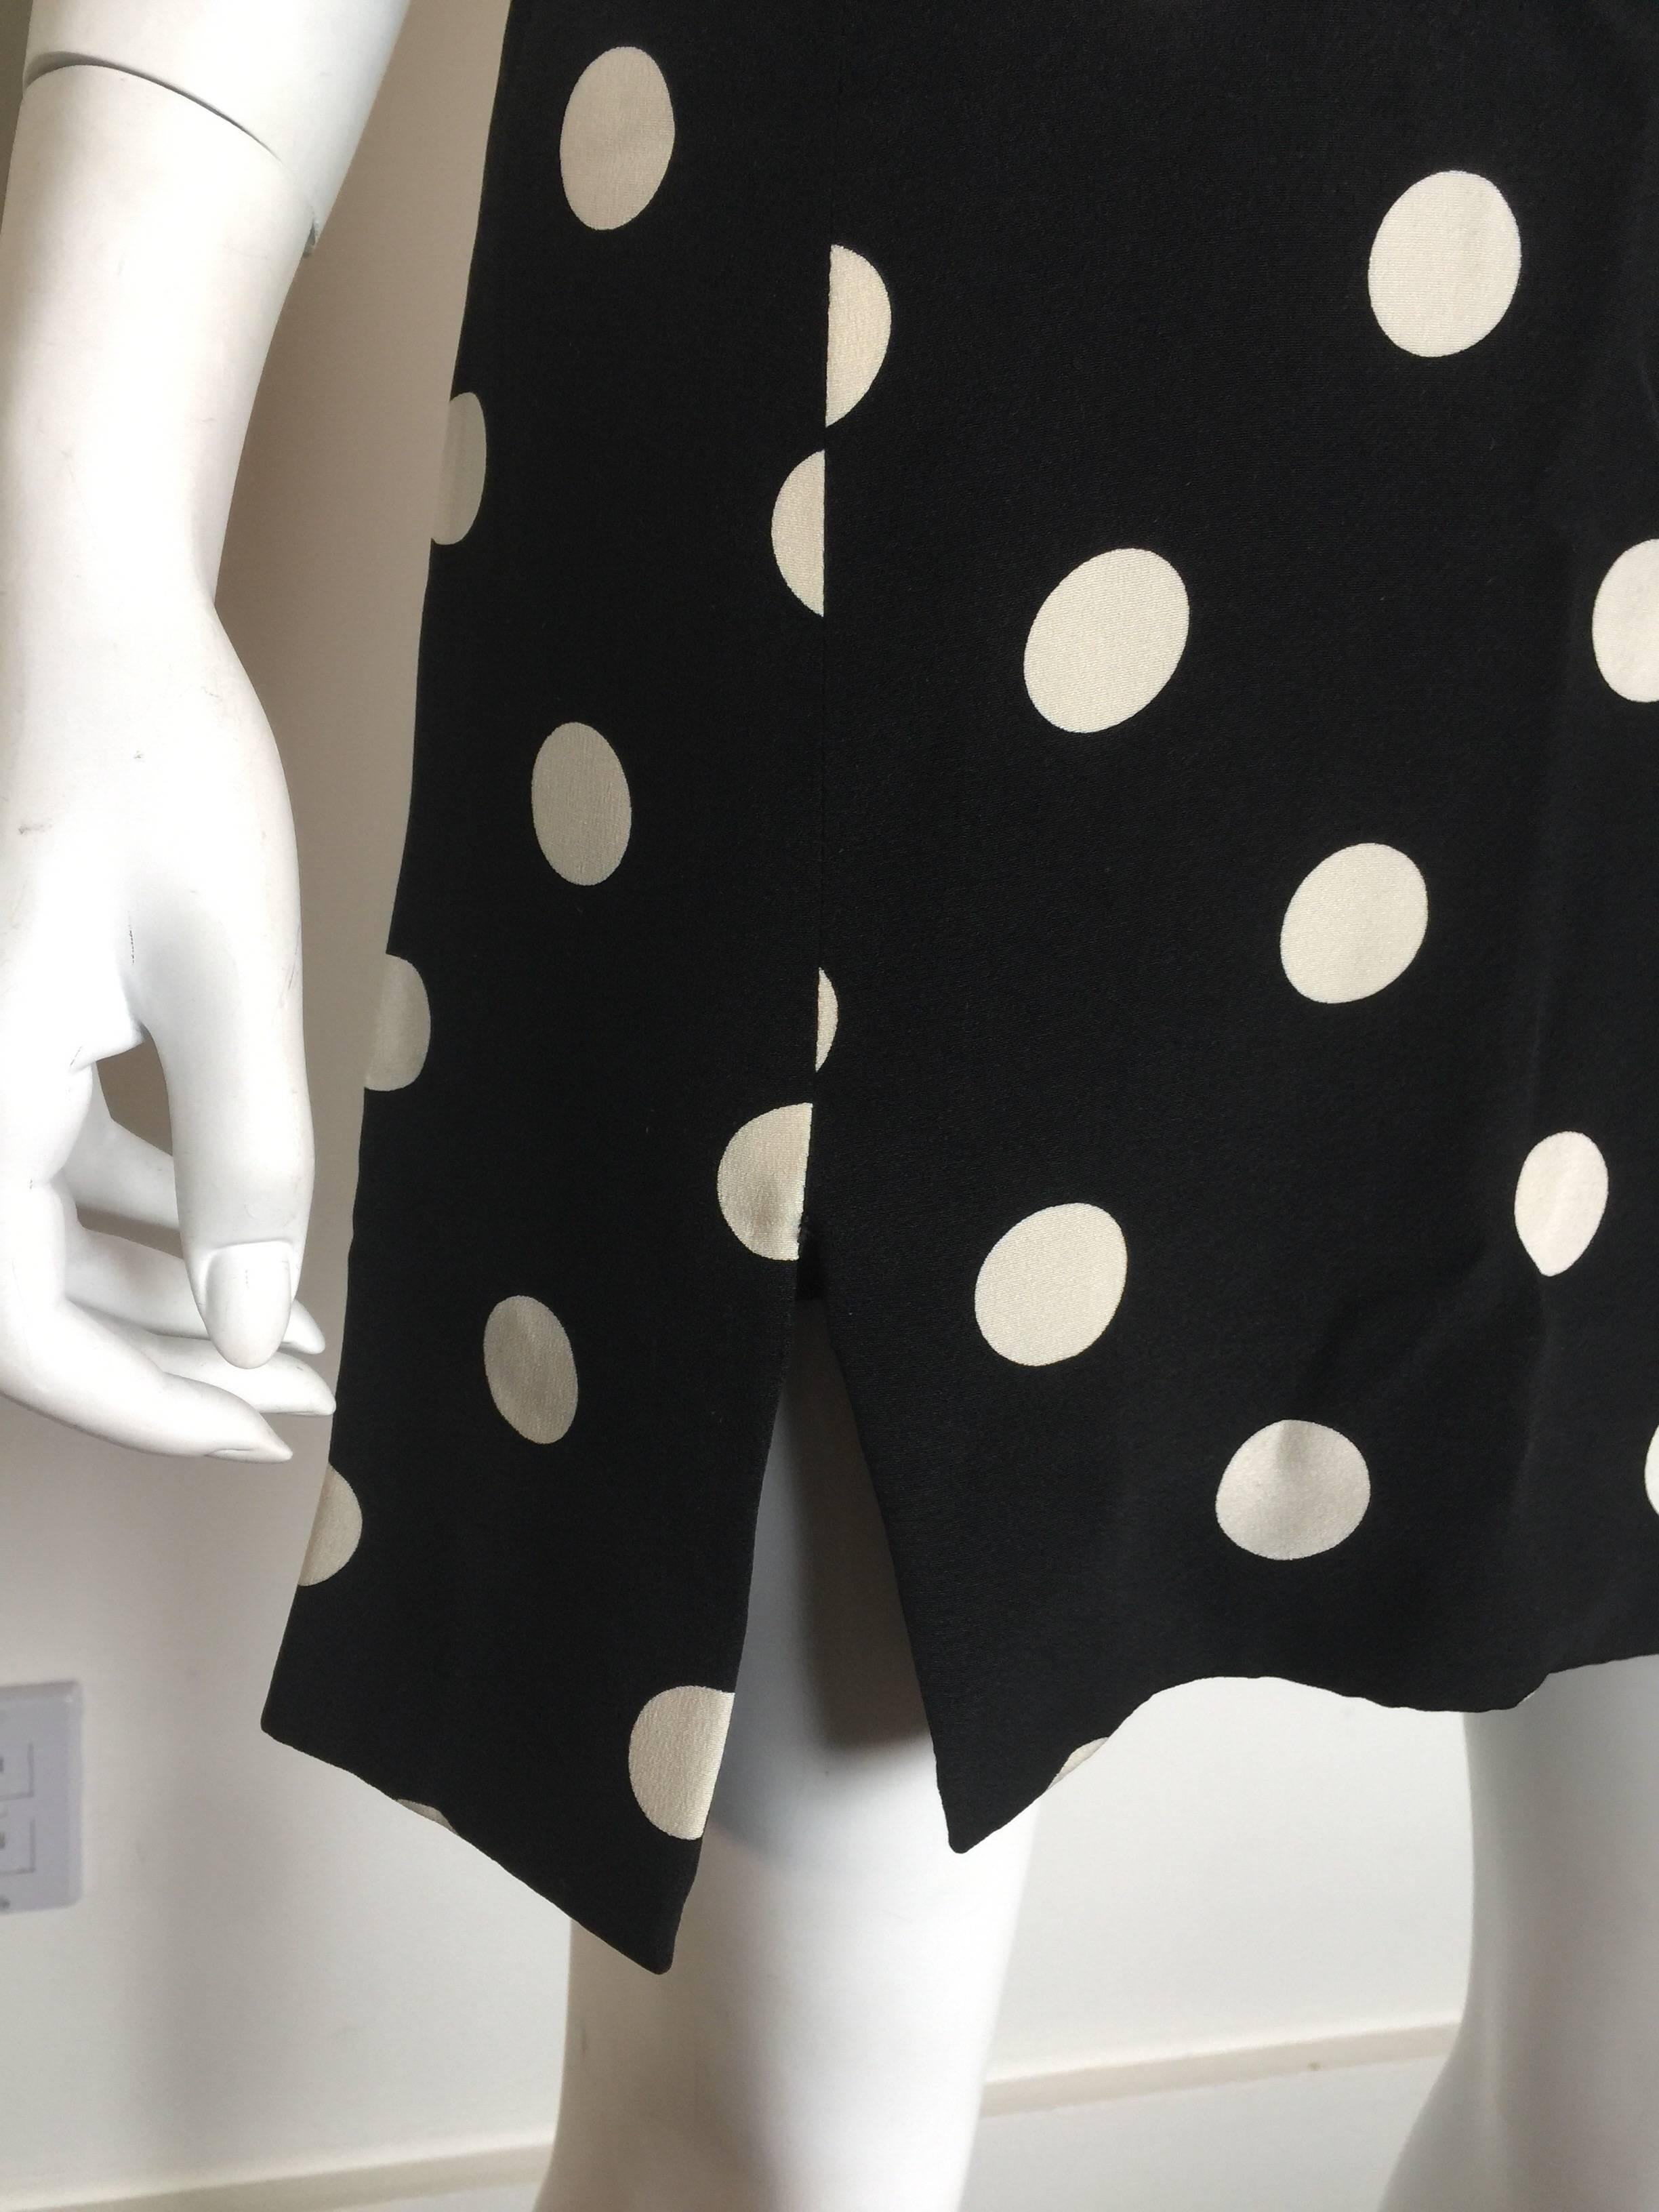 Geoffrey Beene Black Mini Dress with White Polka Dots In Good Condition For Sale In New York, NY